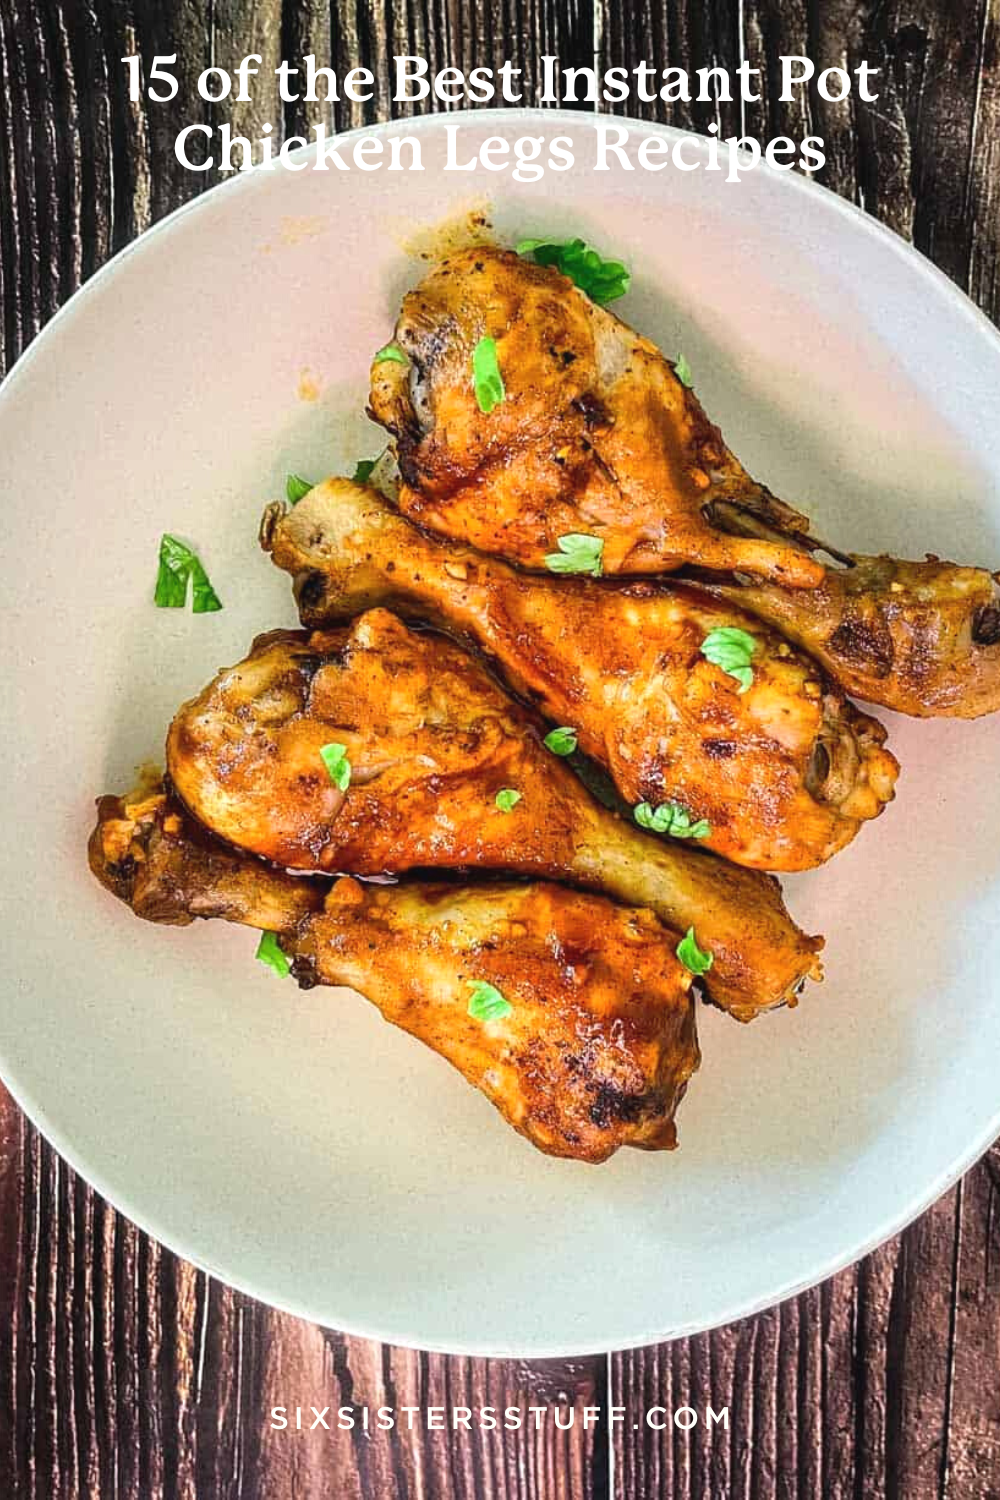 15 of the Best Instant Pot Chicken Legs Recipes